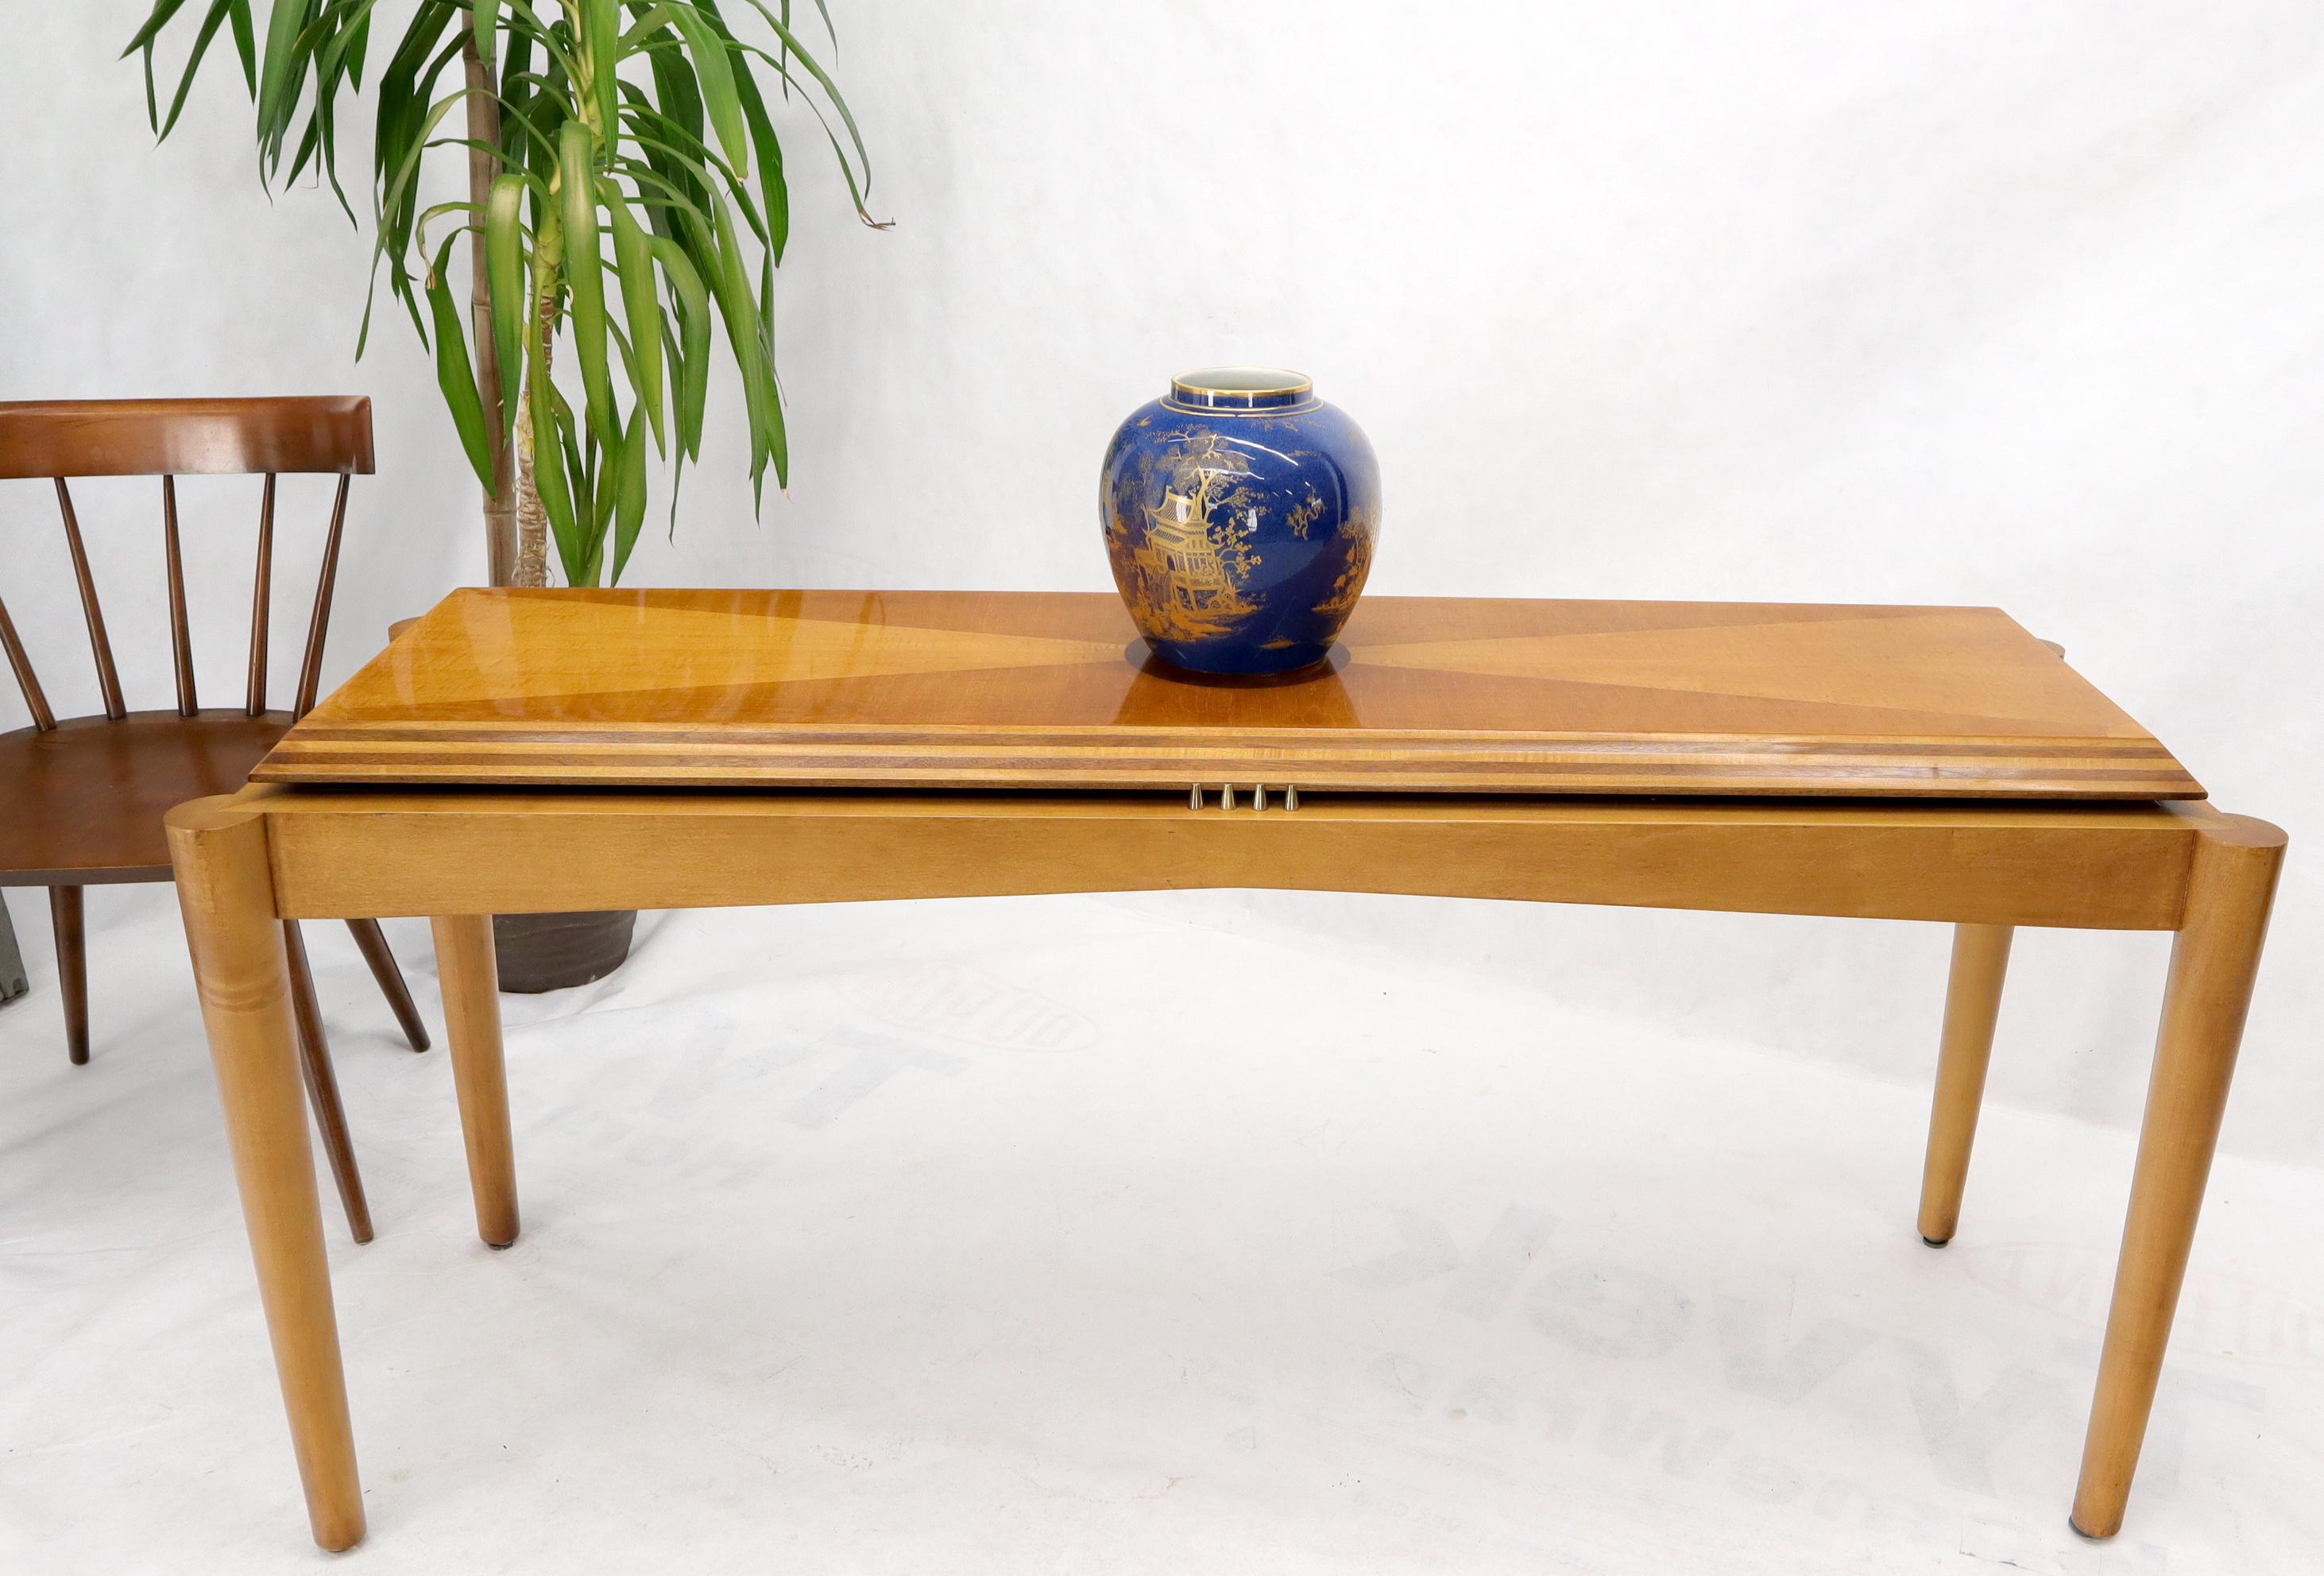 Two-tone woods combination super study and sharp looking console sofa hall entry table by Henredon. Mint original condition.